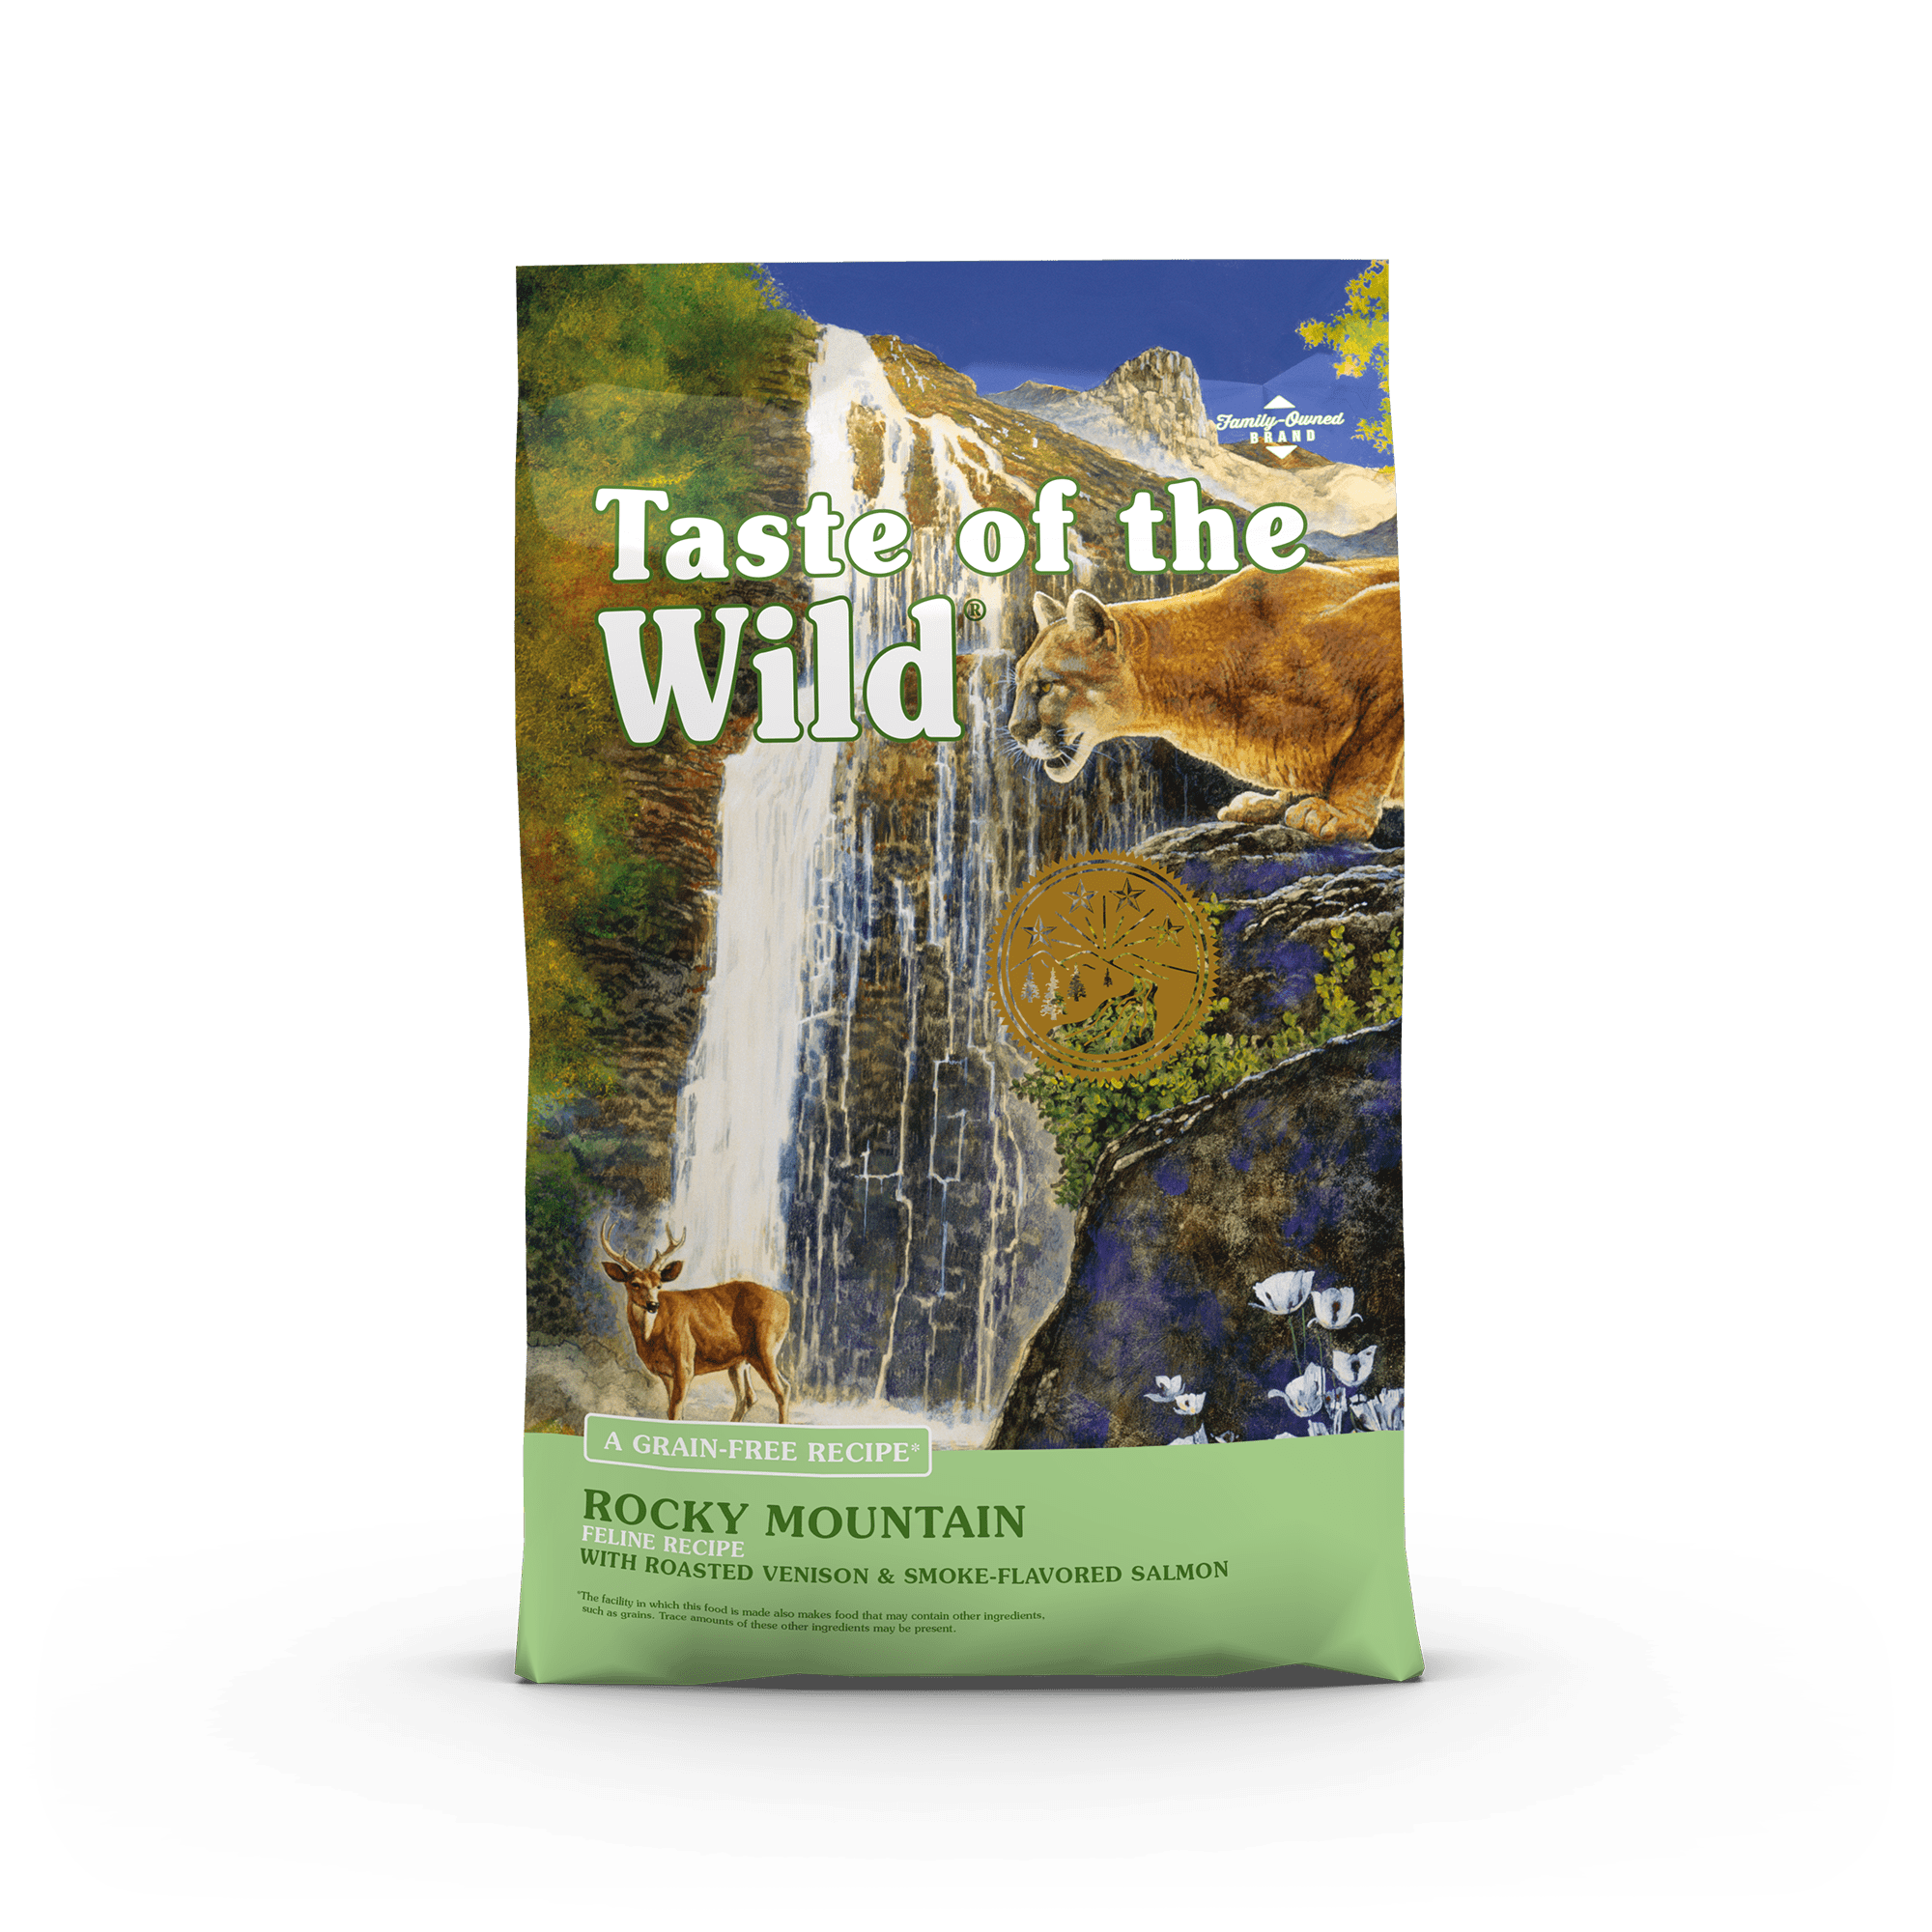 Taste of the Wild Grain-Free Rocky Mountain Feline Recipe with Roasted Venison & Smoke-Flavored Salmon package